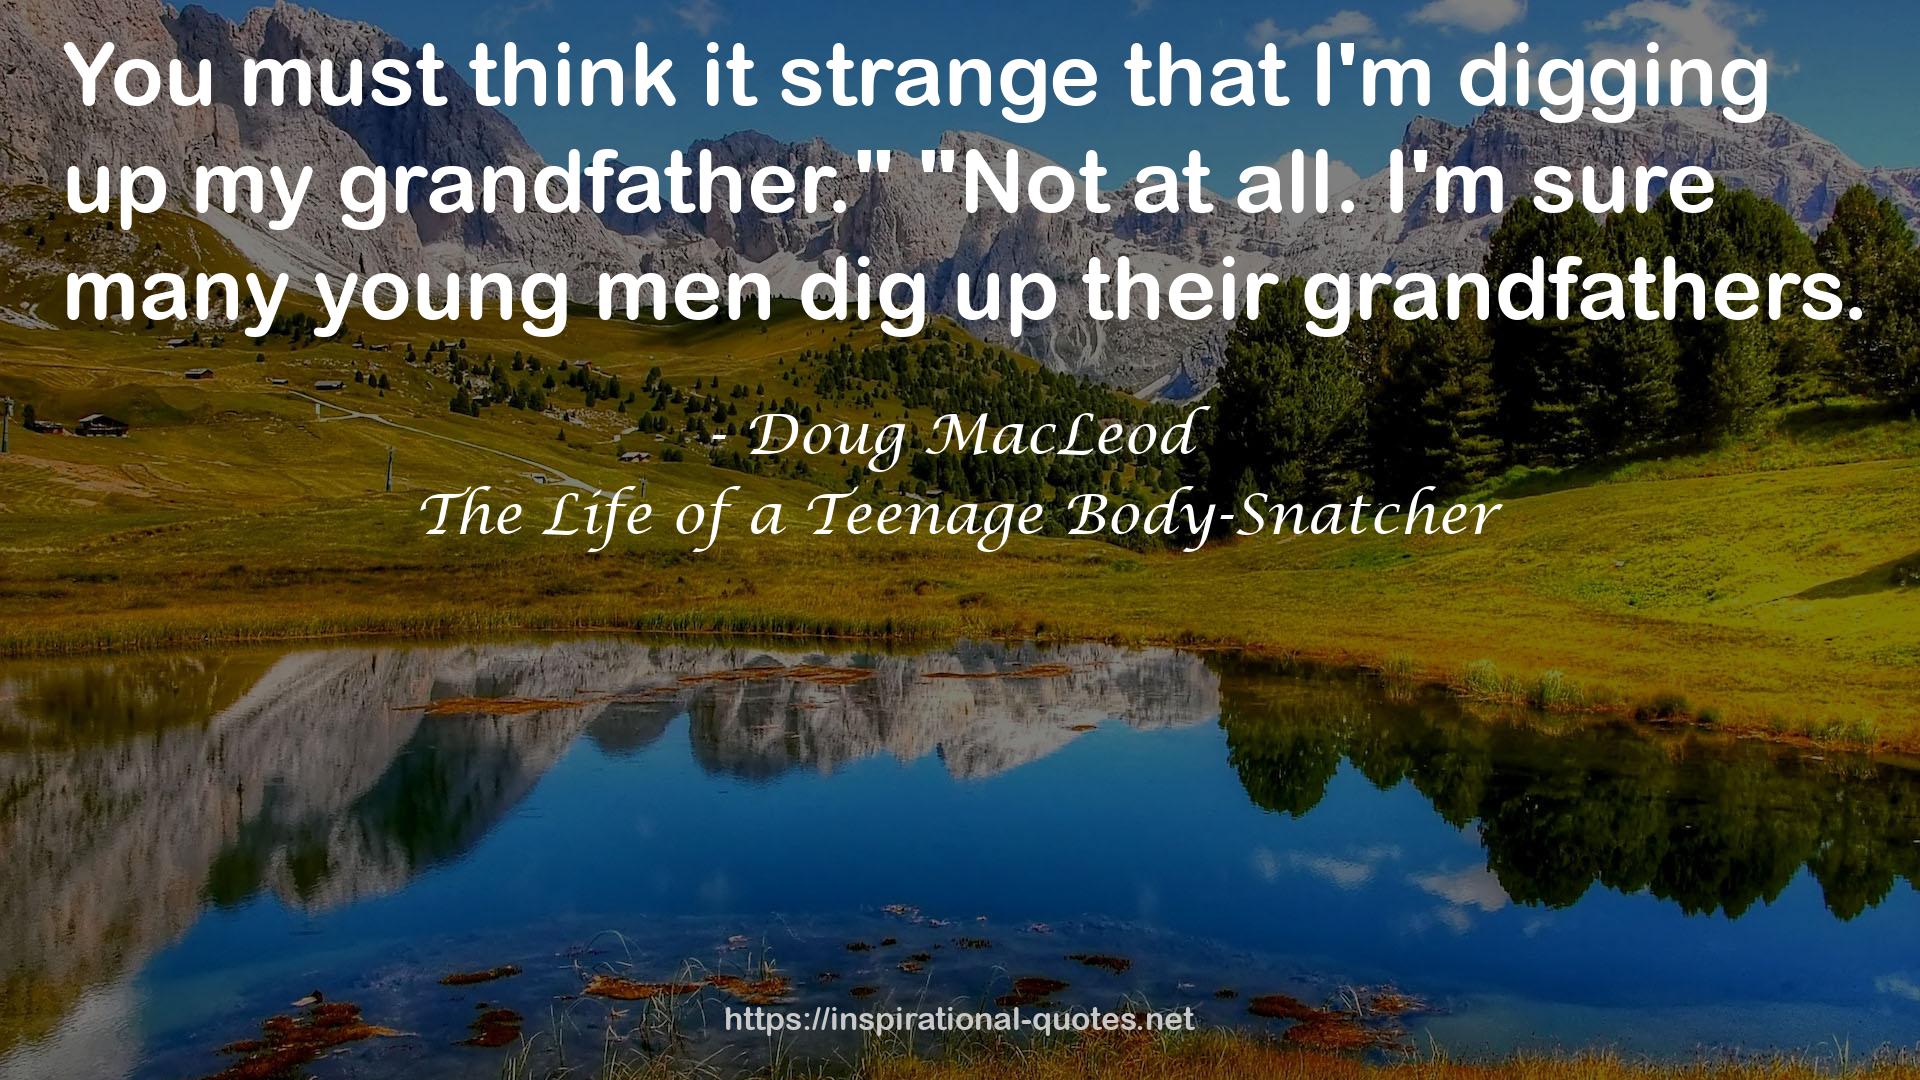 The Life of a Teenage Body-Snatcher QUOTES